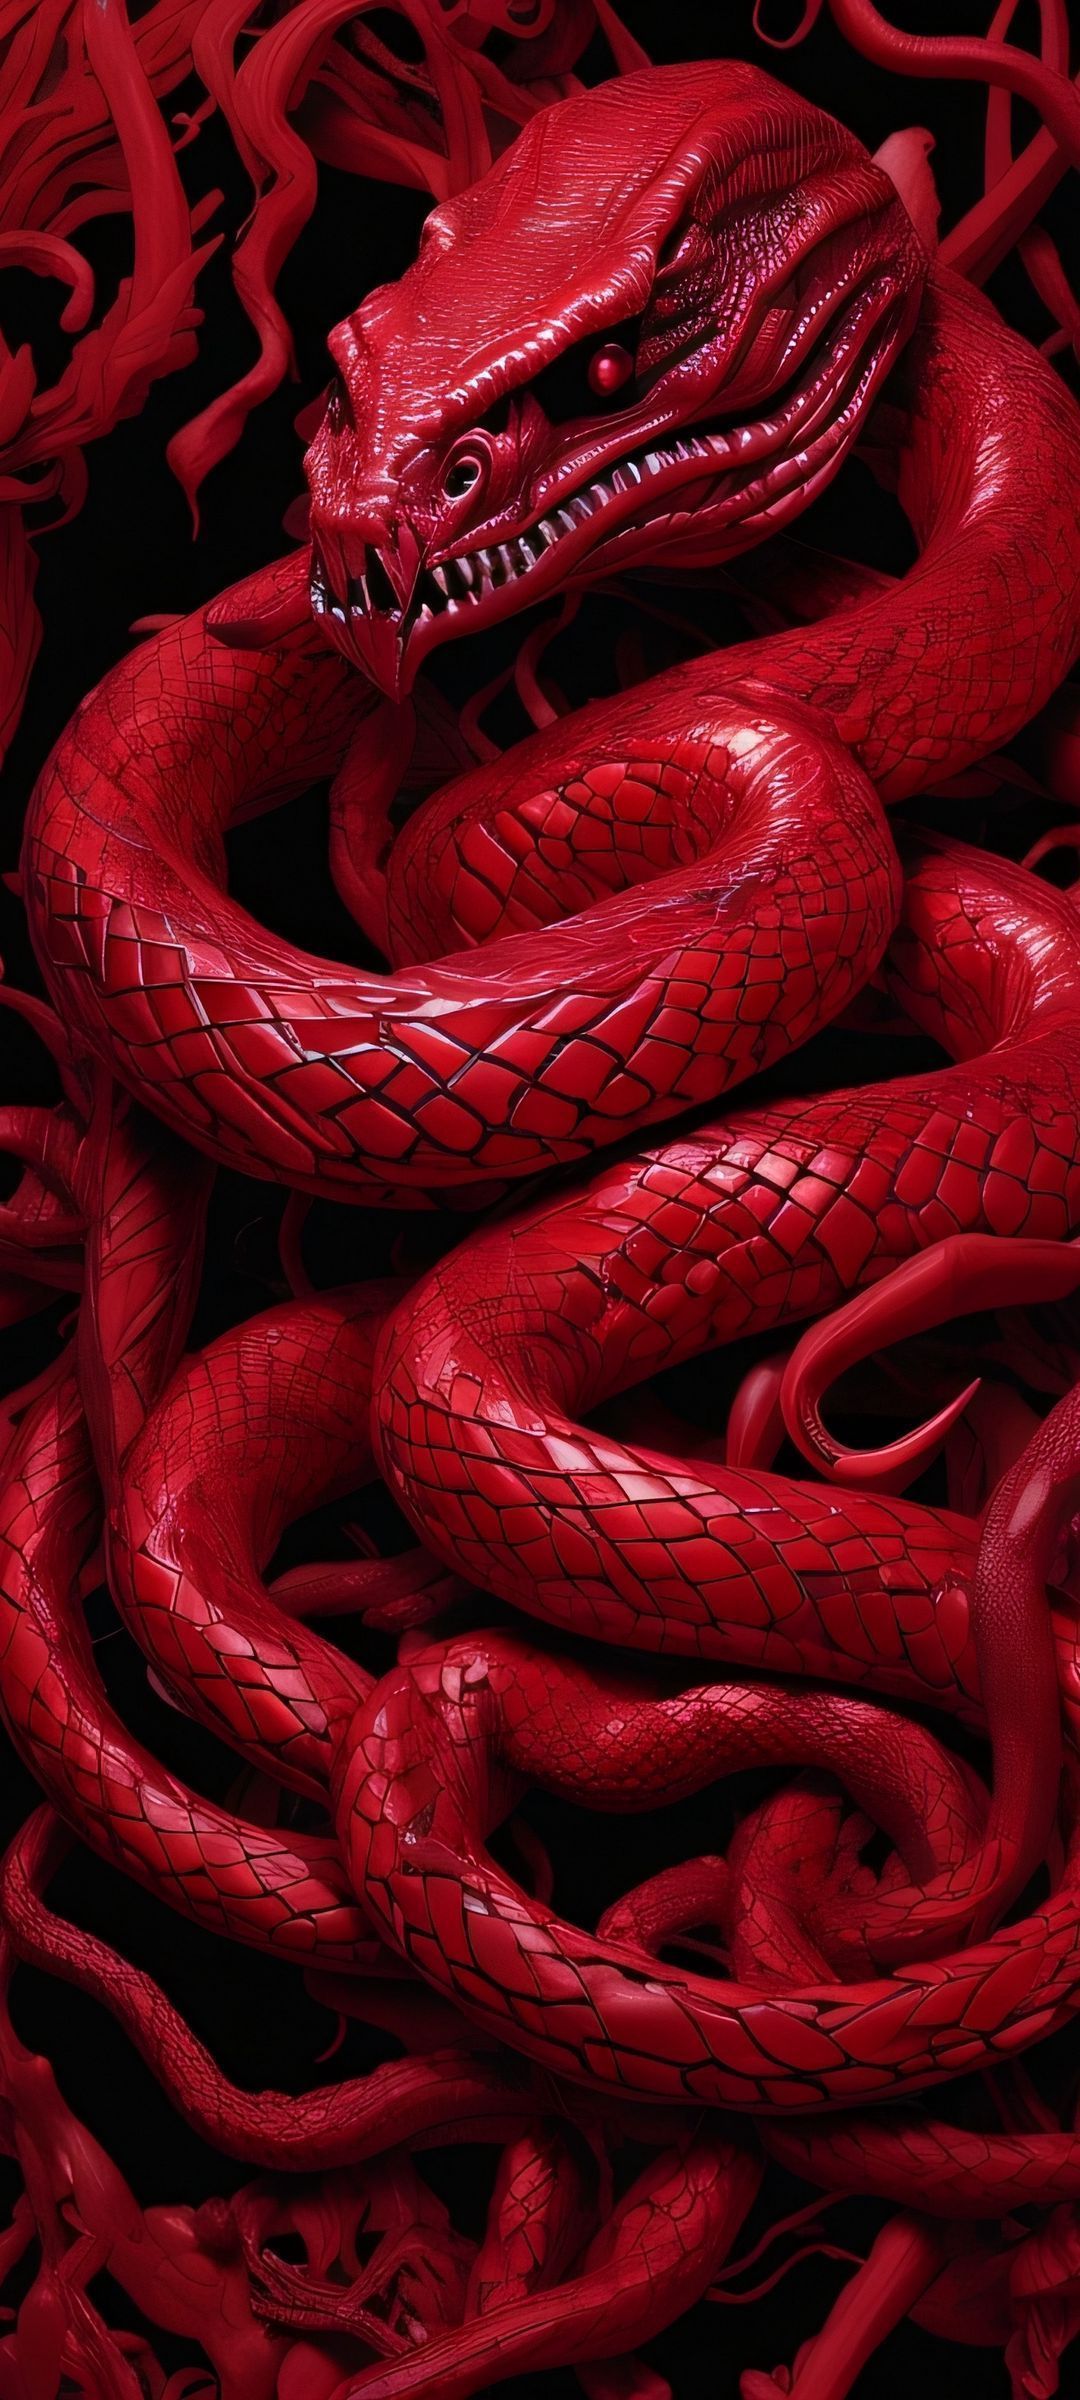 Wallpaper Serpent, Colubrid Snakes, Light, Red, Synthetic Rubber, Background Free Image